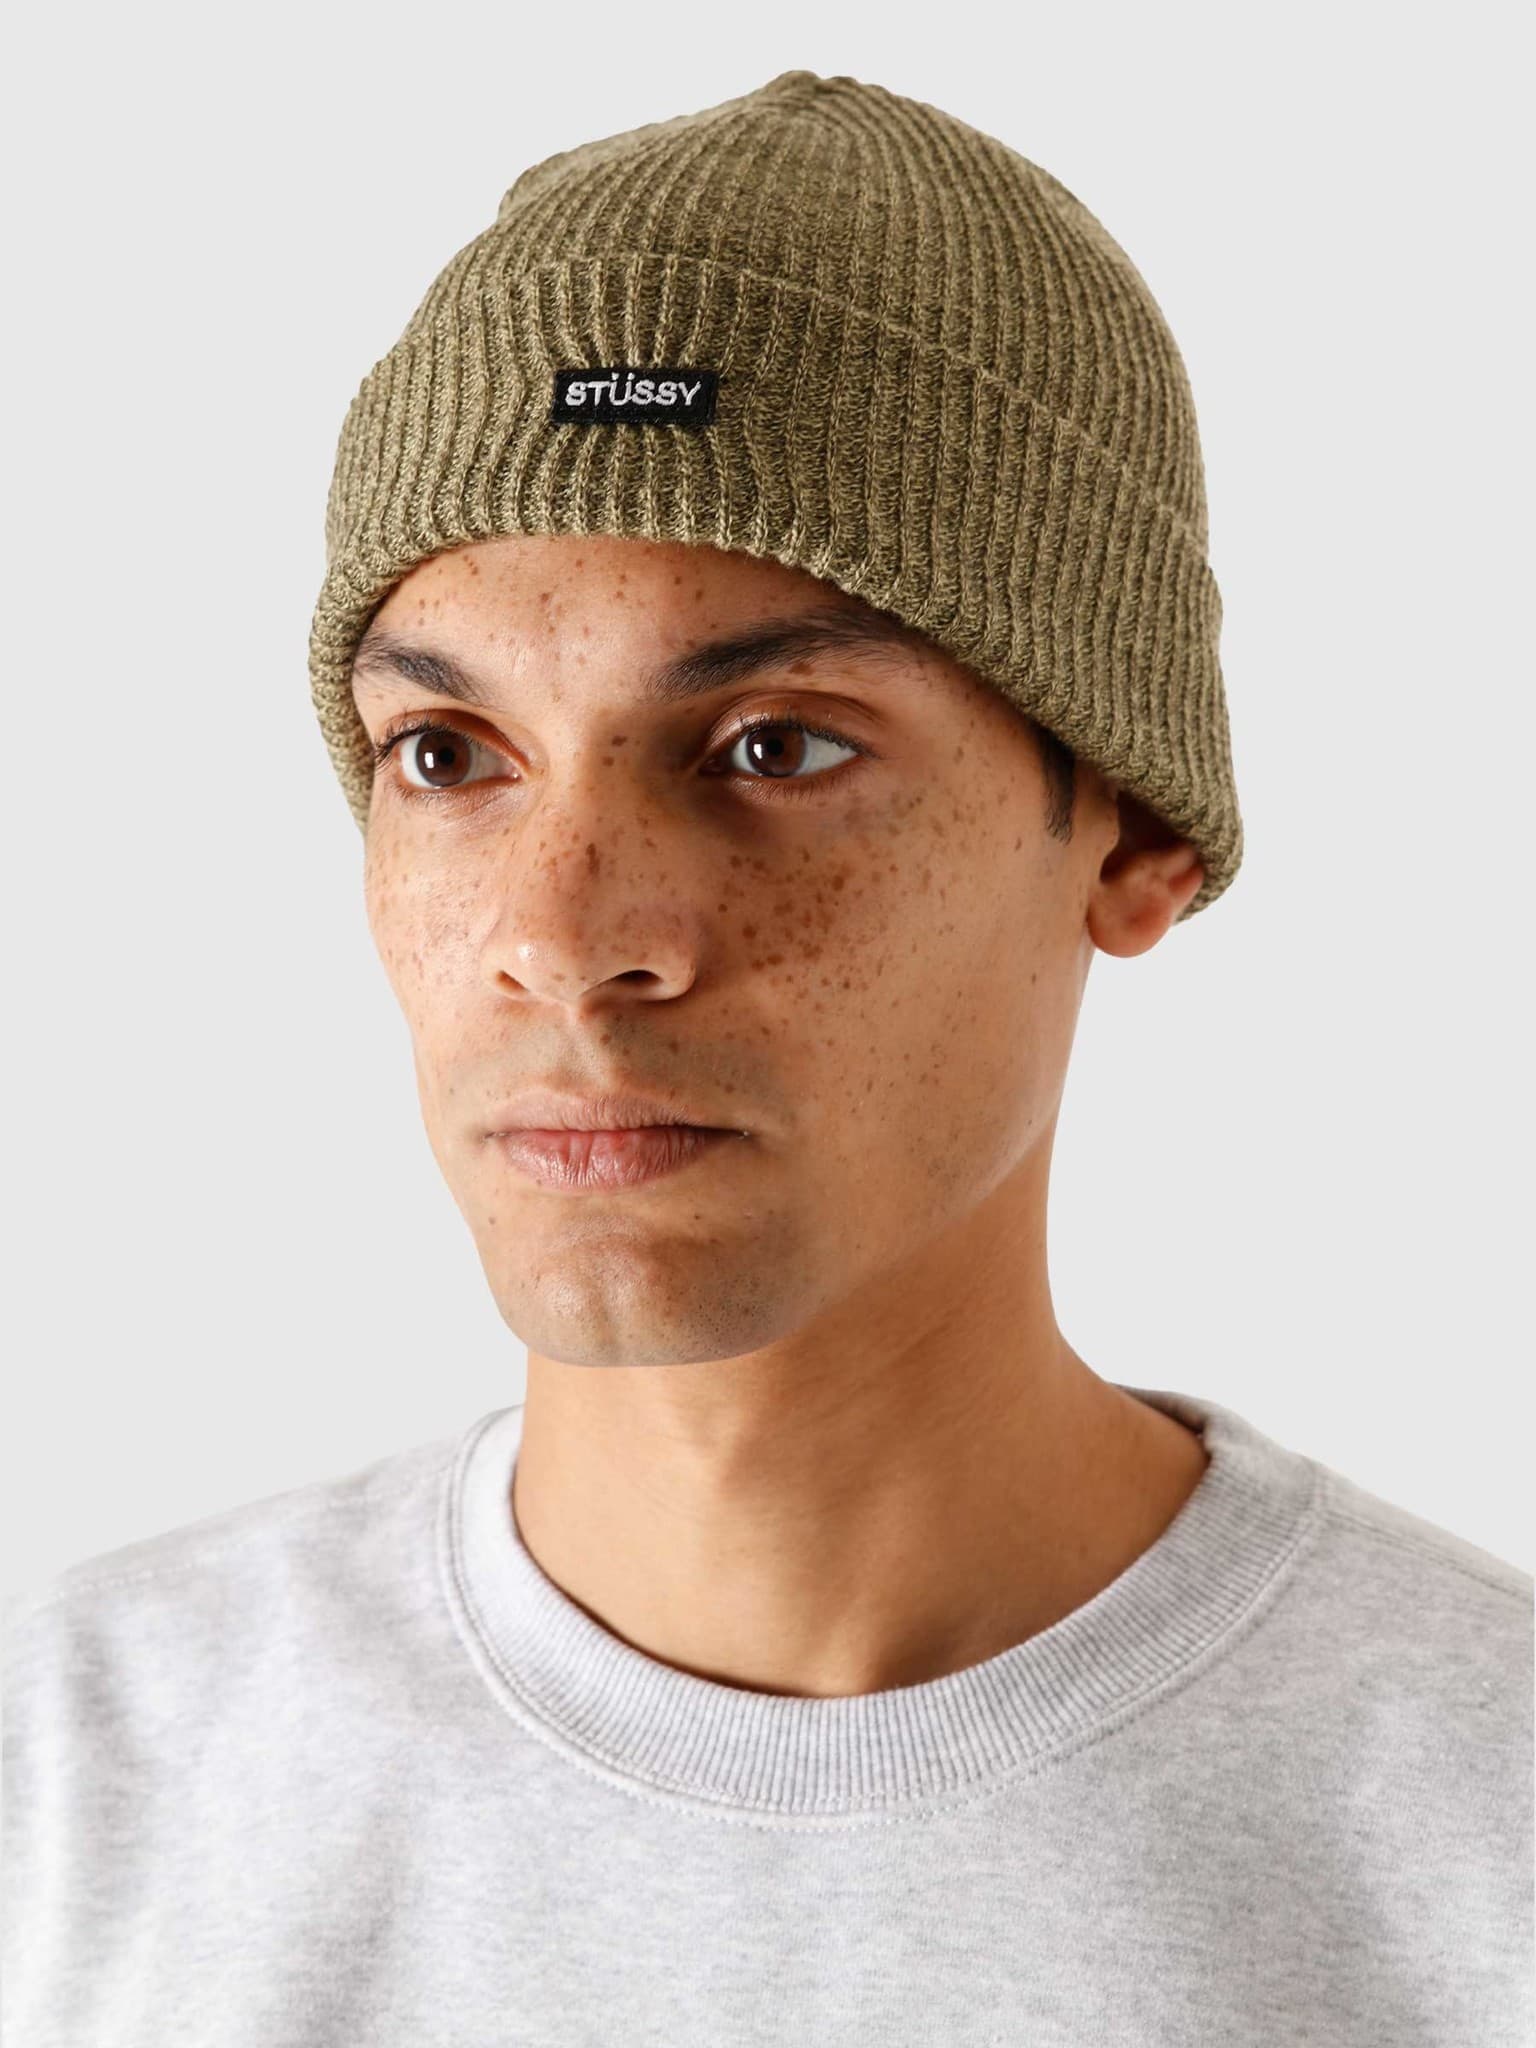 Small Patch Watchcap Beanie Olive 132988-0403